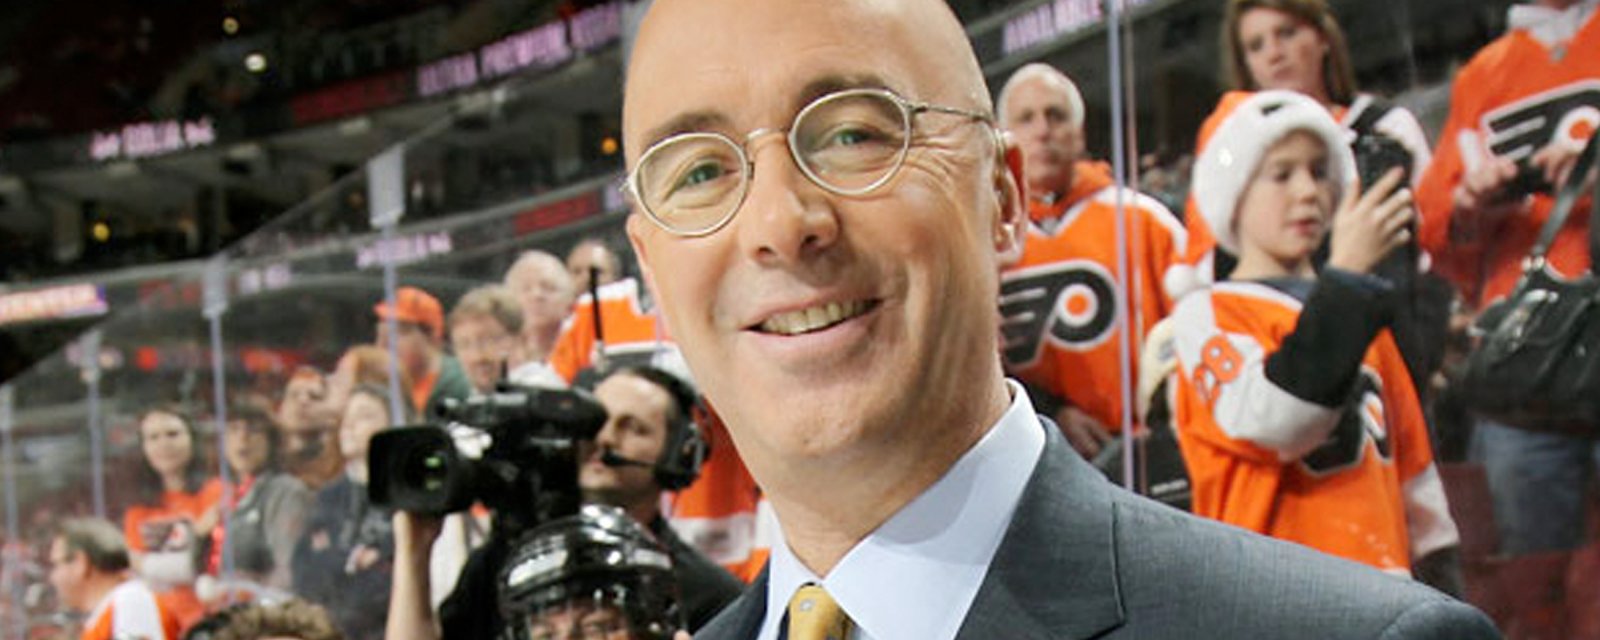 Pierre McGuire embarrasses himself with another idiotic statement live on air